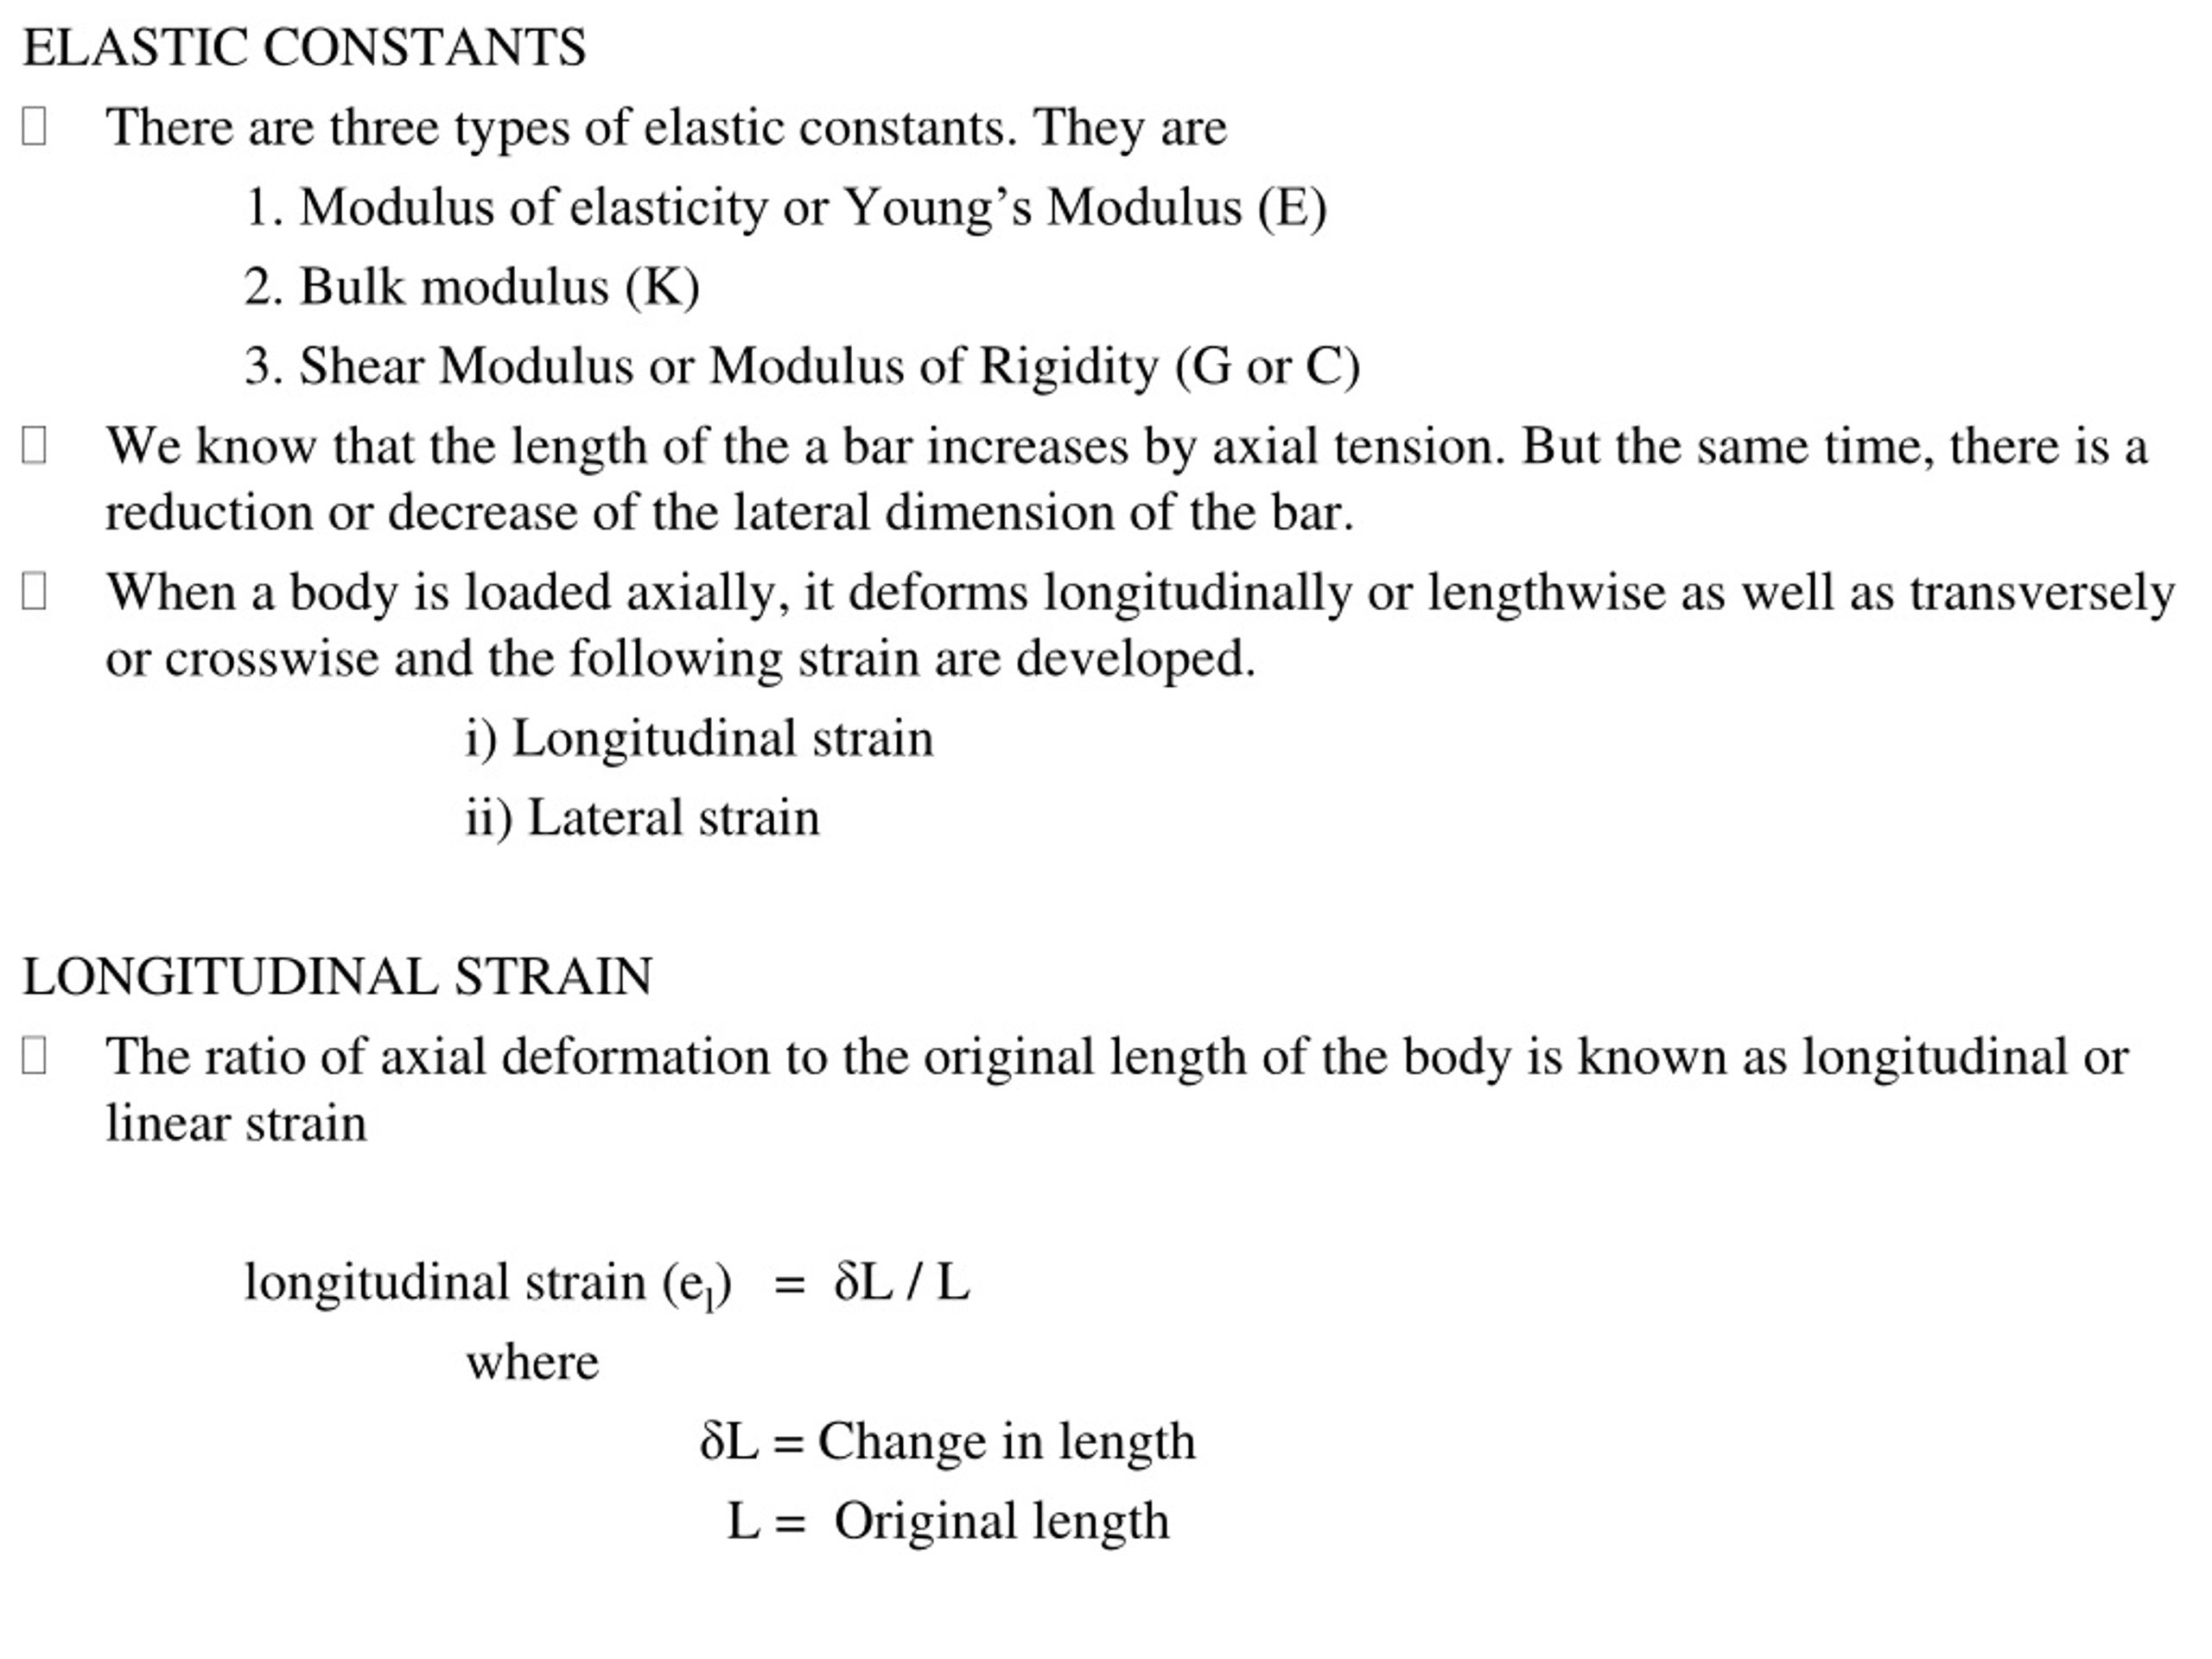 PPT - ELASTIC CONSTANTS There are three types of elastic constants